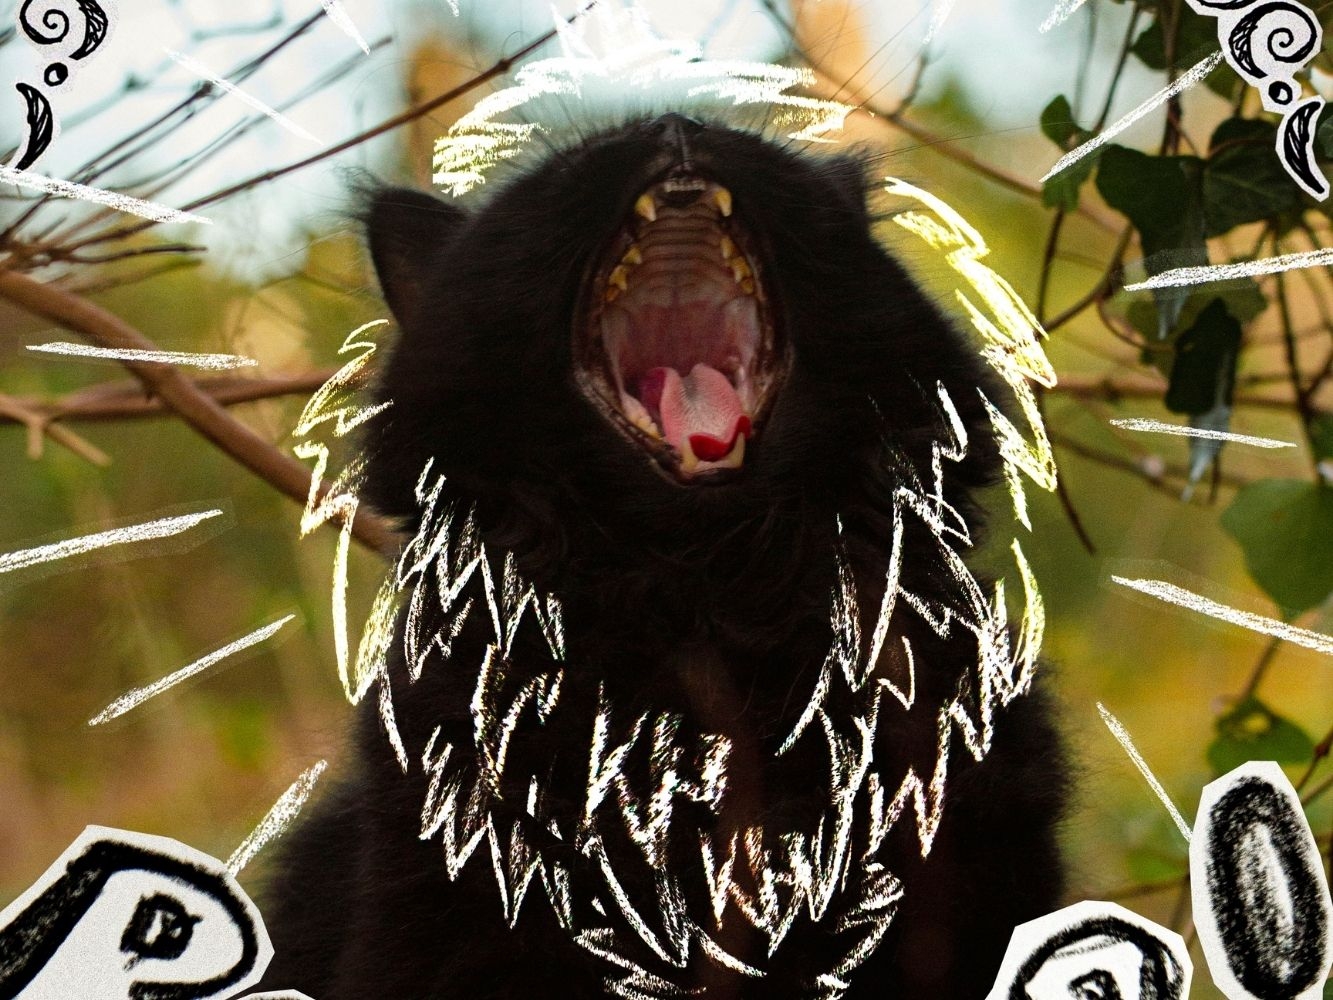 Photograph of a black cat yawning with a lion's mane illustrated over it in white lines